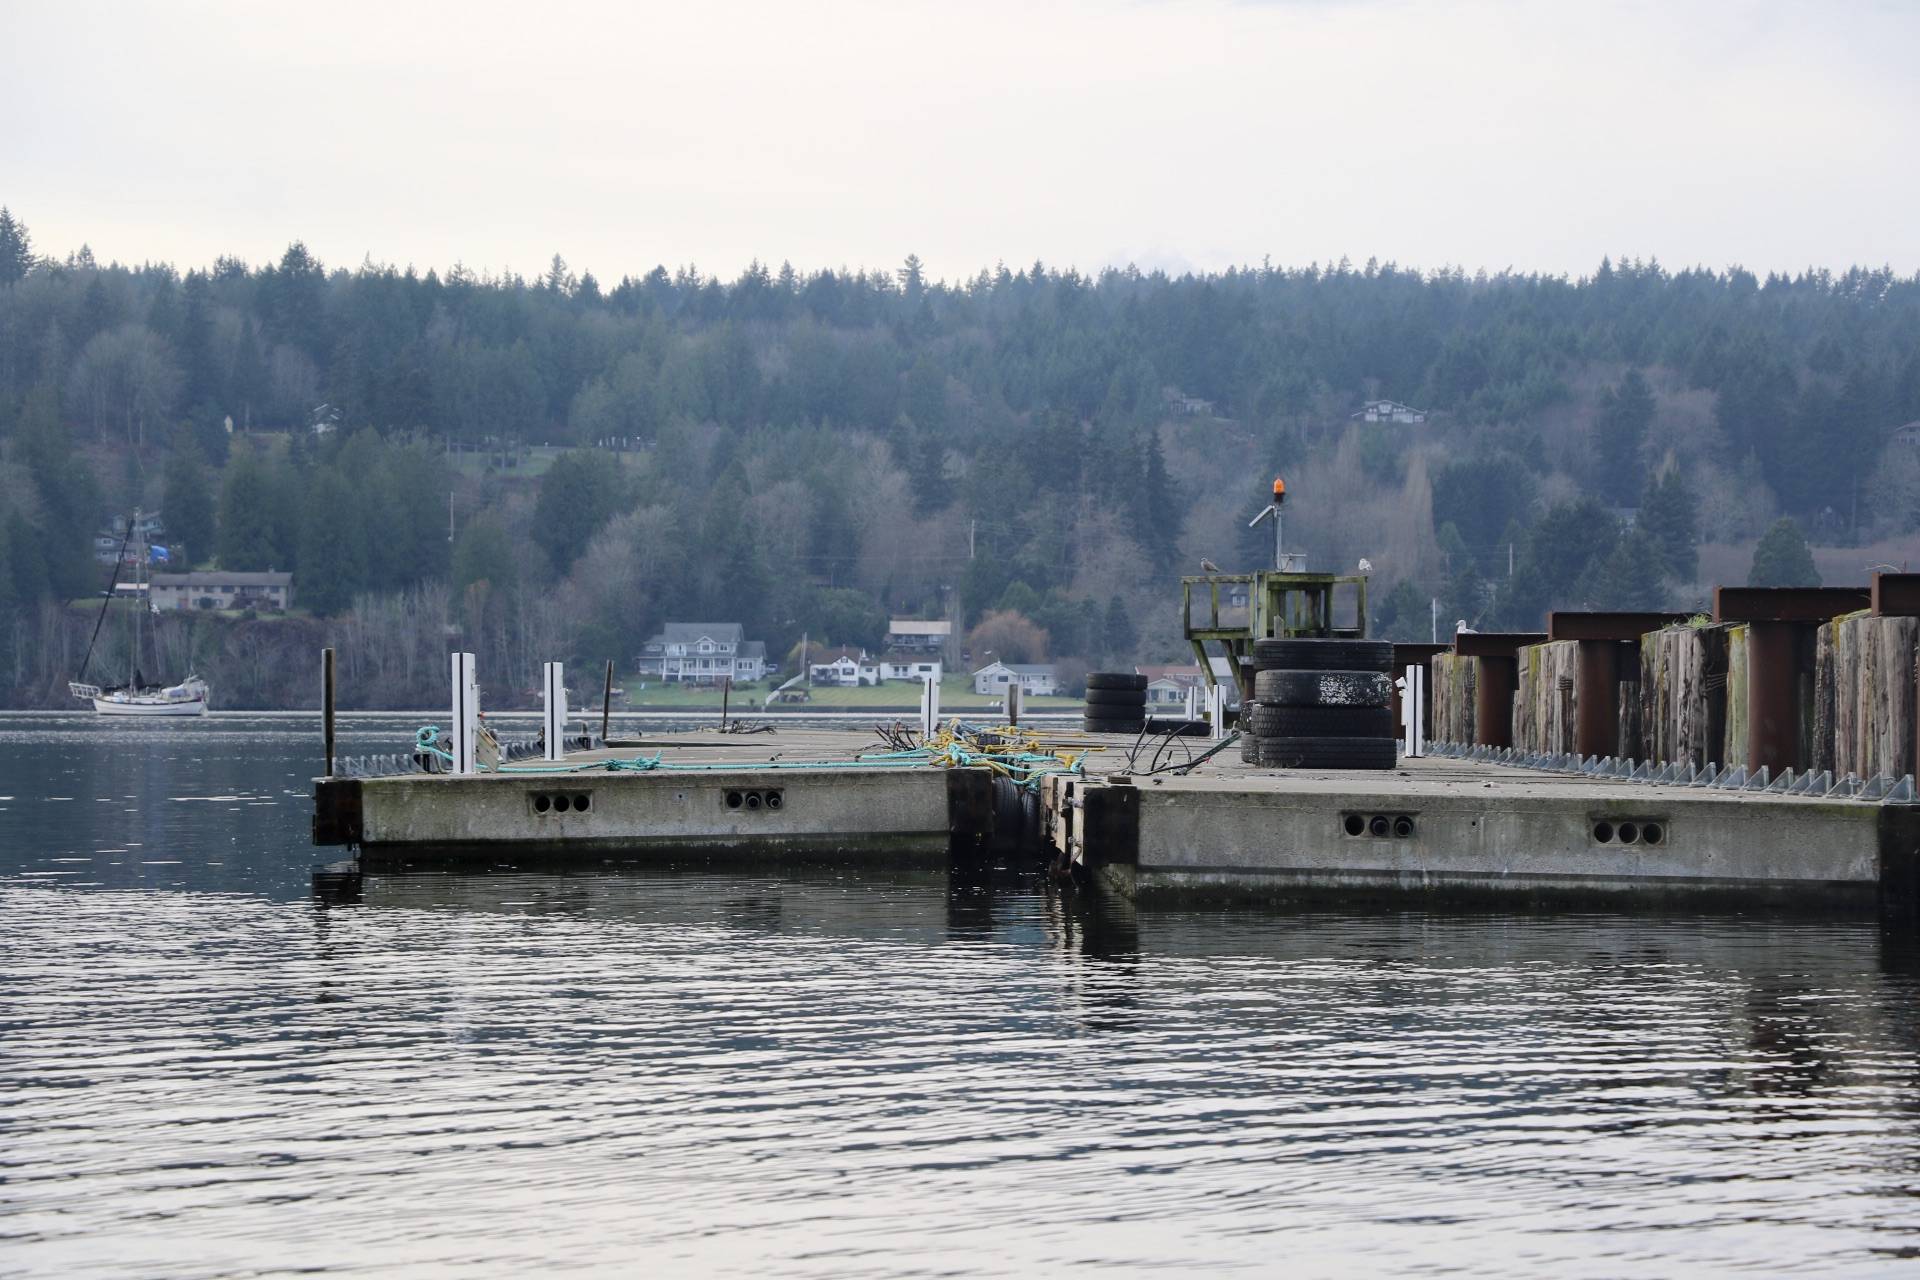 The new breakwater is made of concrete and was donated to the Port by Elliot Bay Marina. KPark/NKH